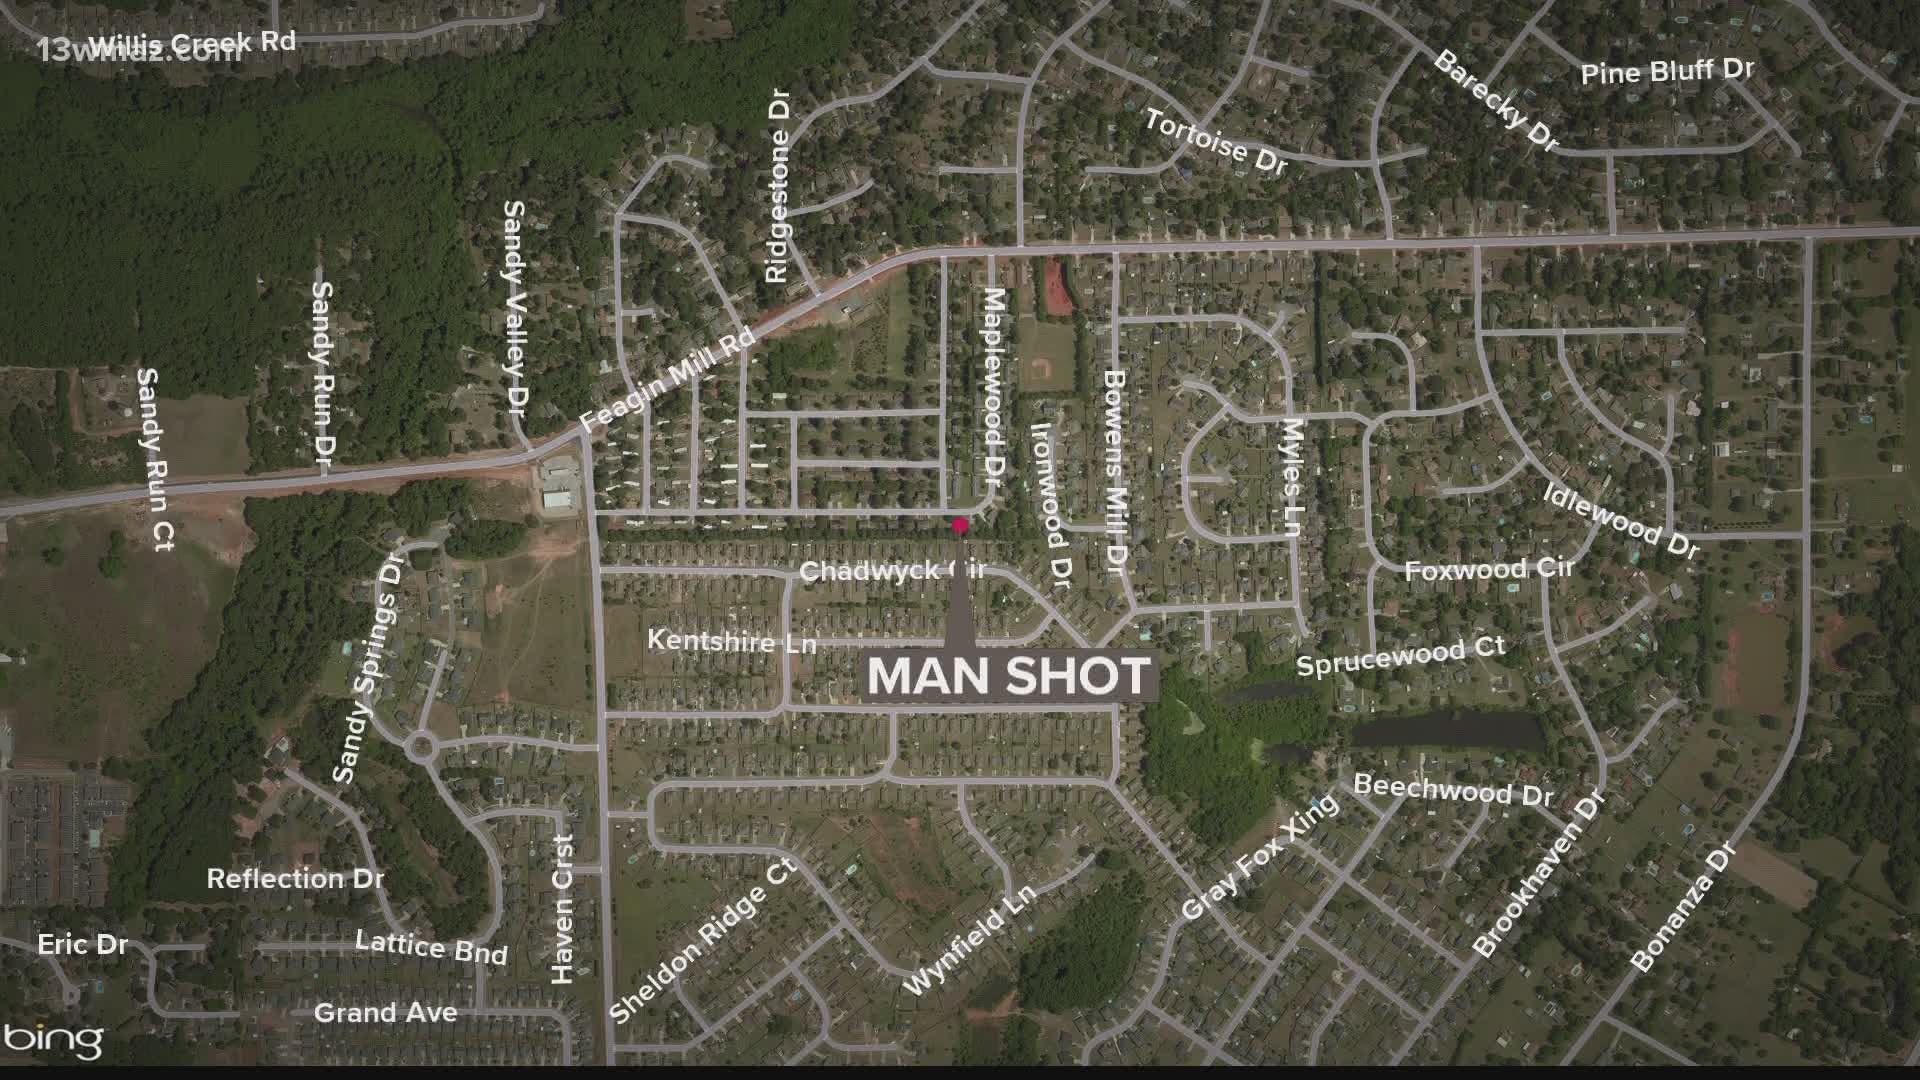 A man said he was home alone when he heard a knock at his door. When he opened up, another man shot at him before running away.